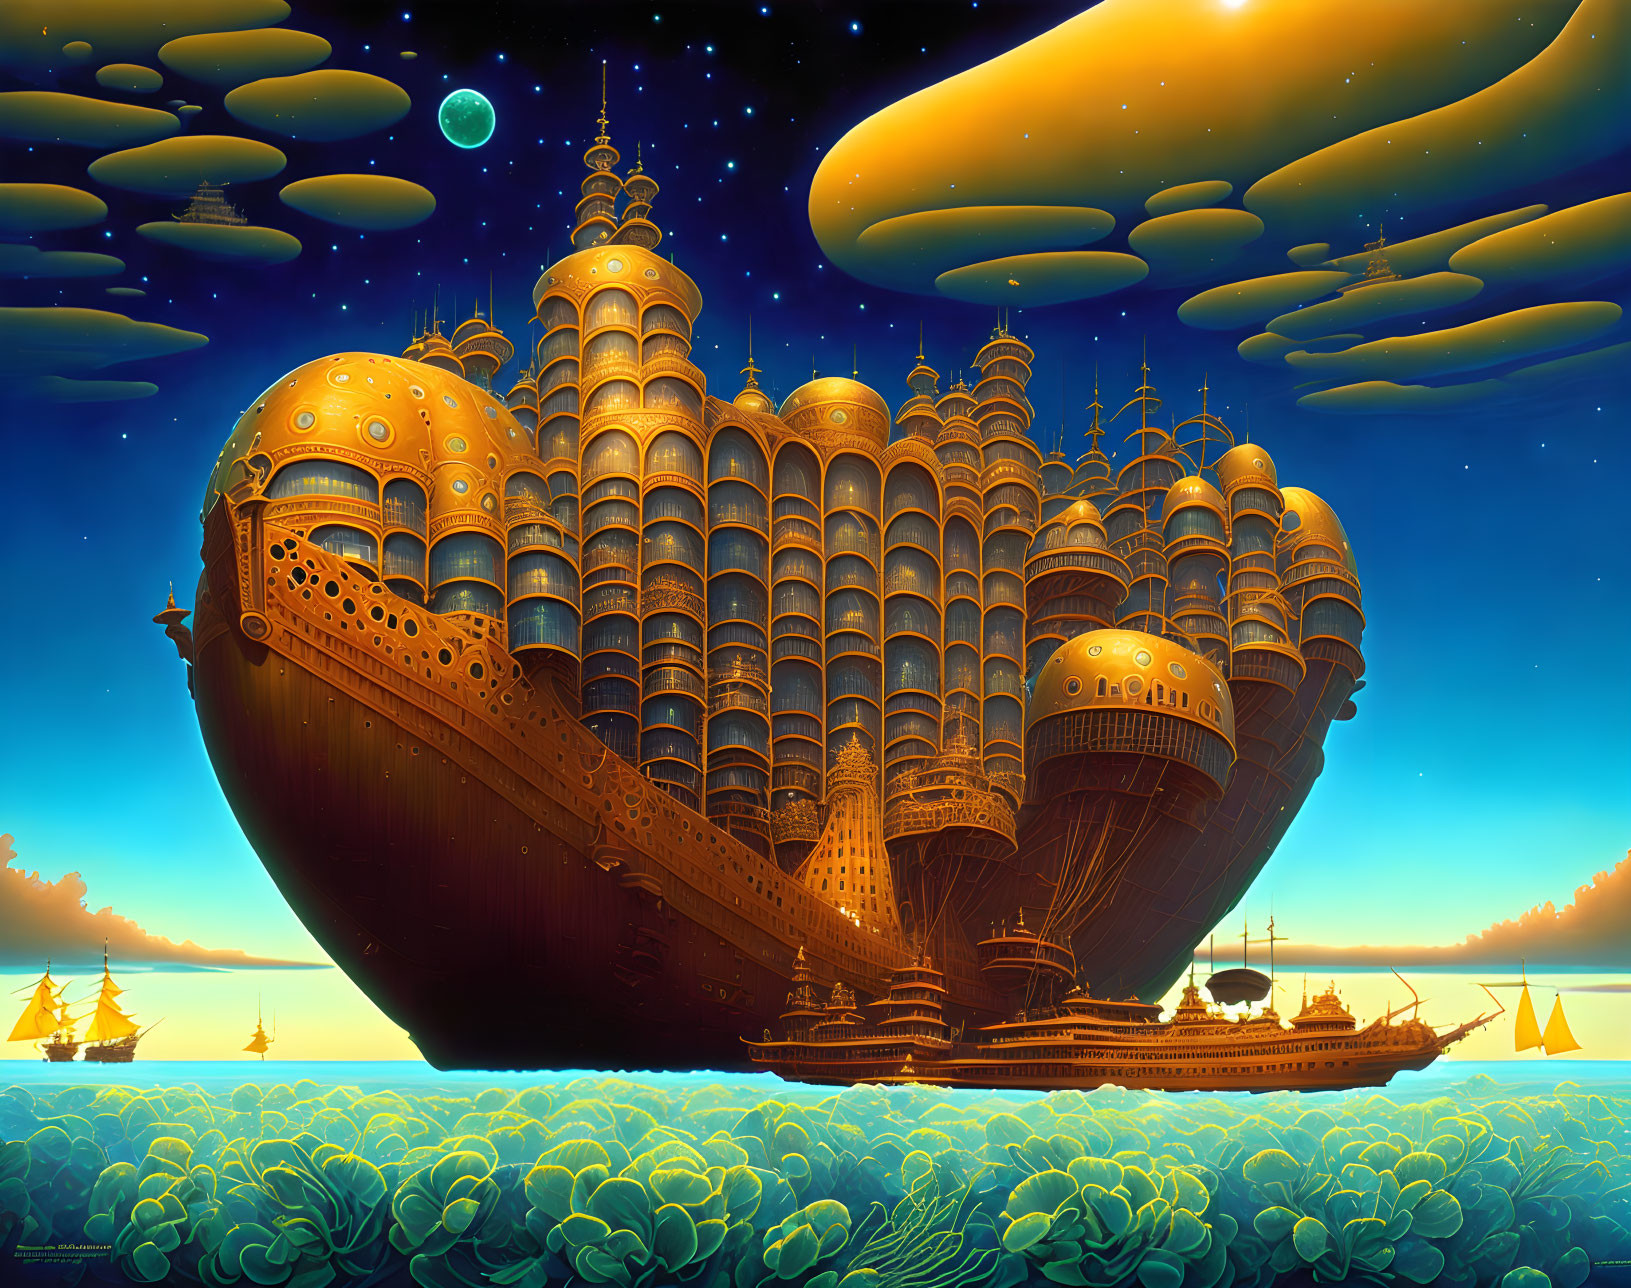 Steampunk airship with multiple levels sailing in starry sky